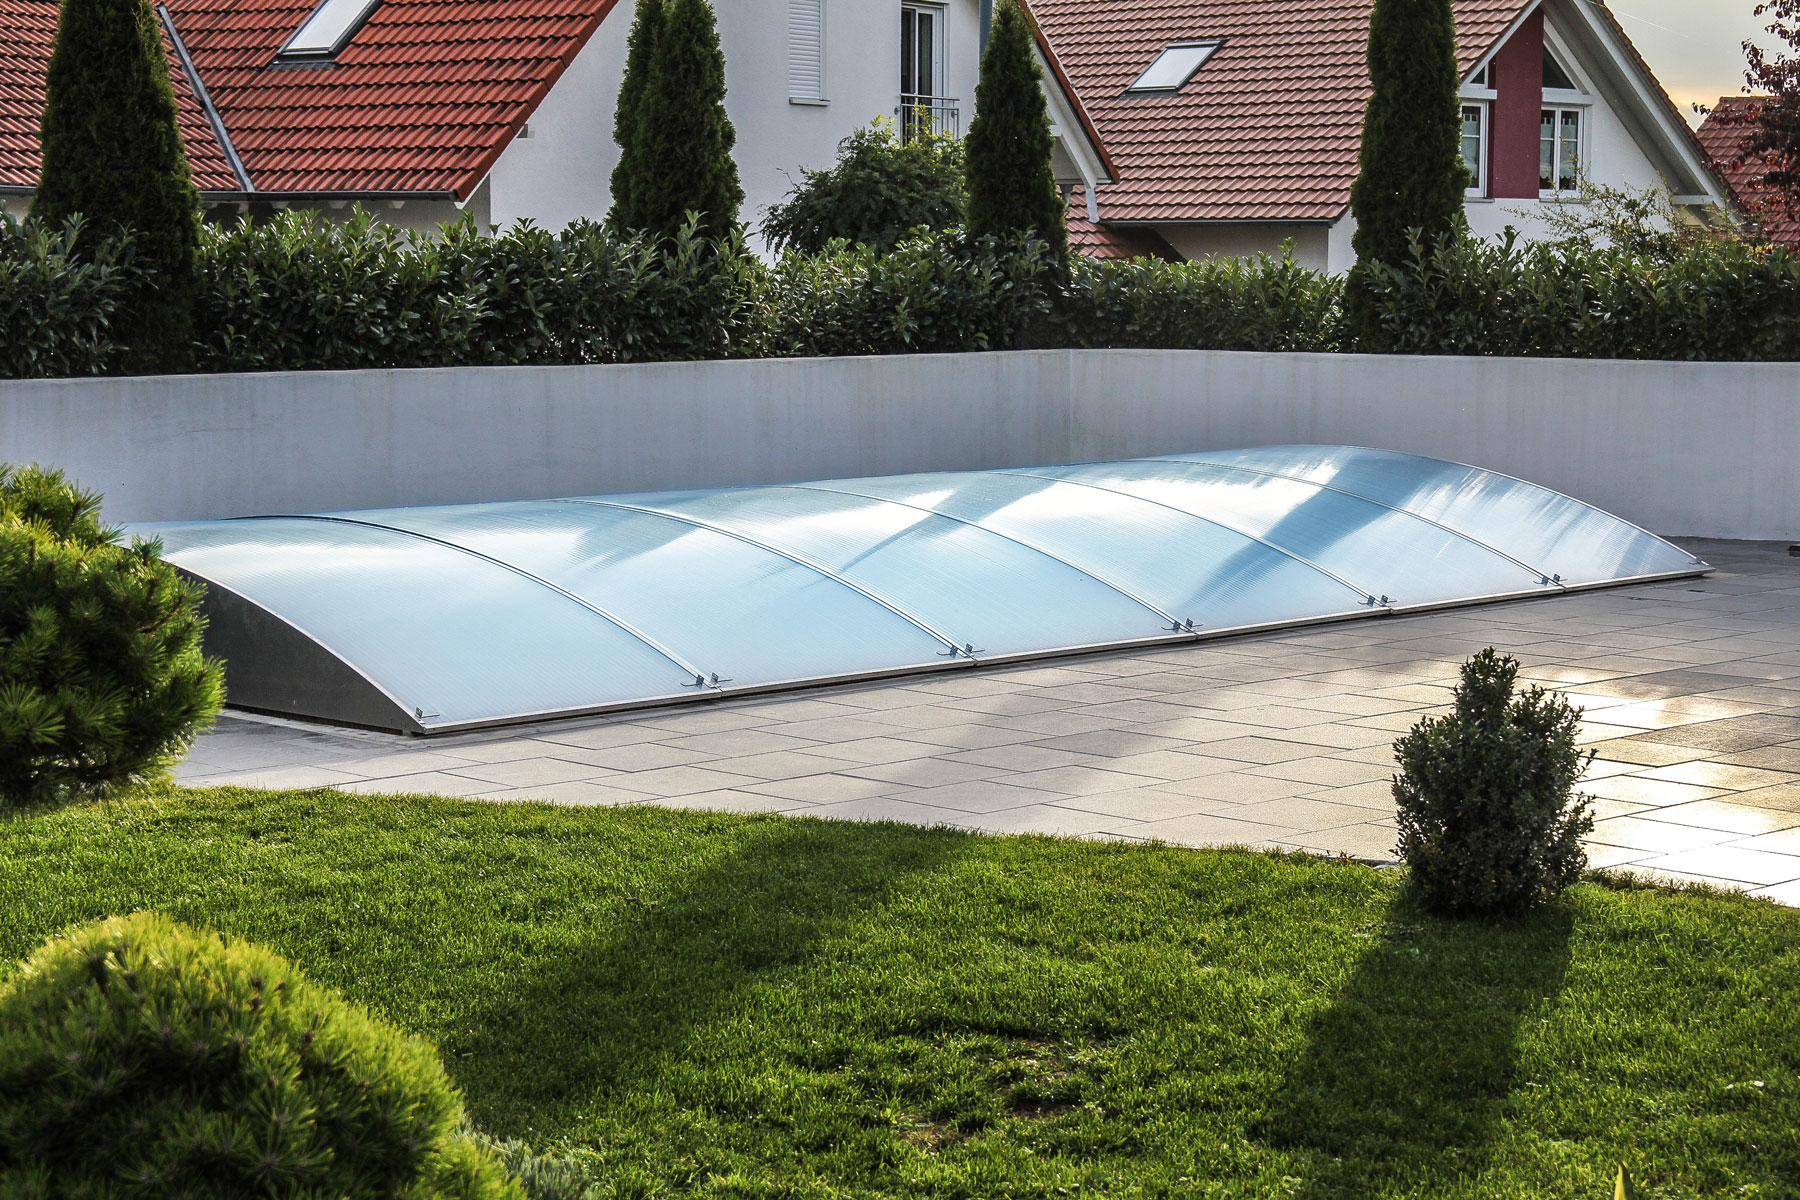 FlexiRoof Premium - Highly functional and extremely robust pool enclosure for year-round use